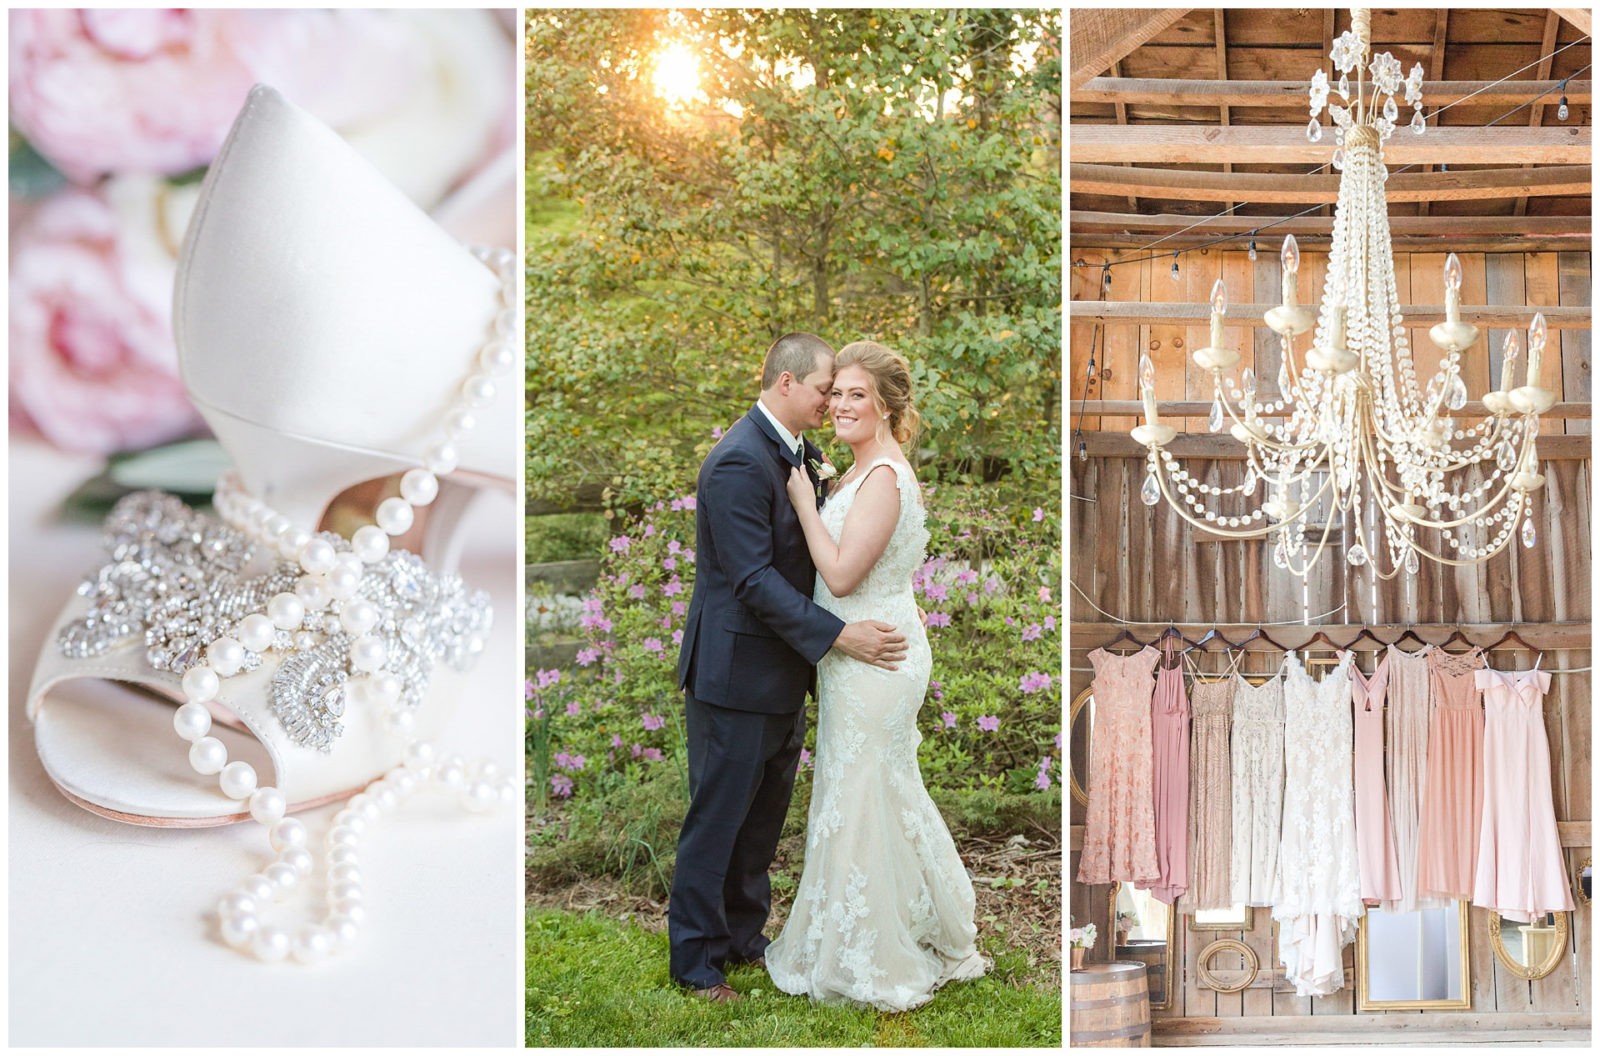 Spring wedding at the Barn at Springhouse Gardens in Nicholasville, KY